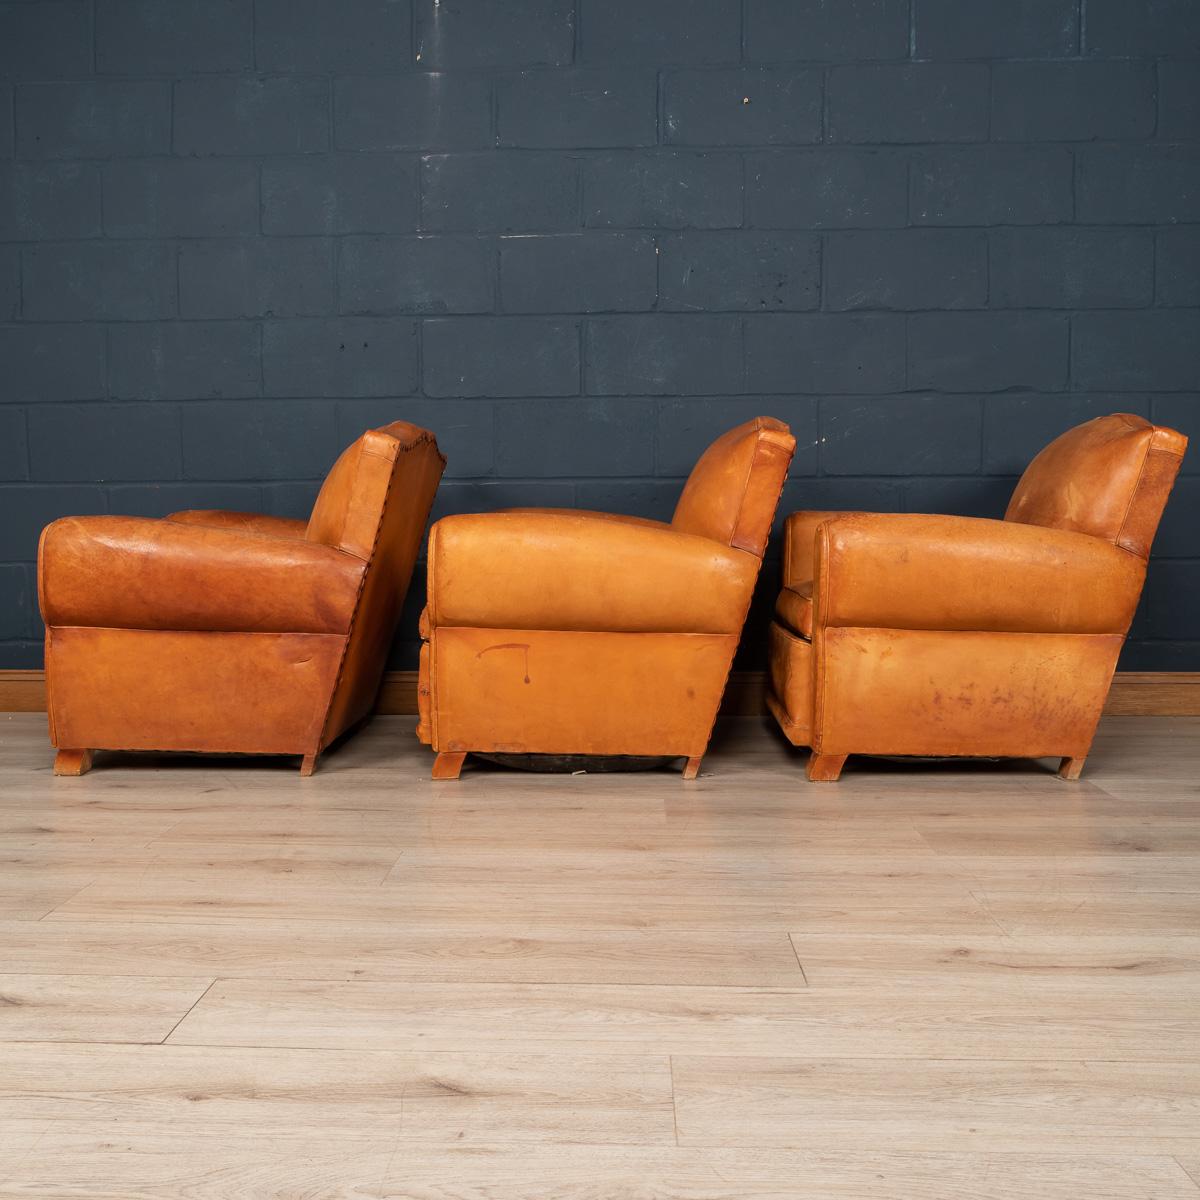 A gorgeous set of three French leather club chairs, circa 1950. Structurally sound, these armchairs have perennially oozed class and sophistication from the day they were made in the middle of the 20th century through to the modern